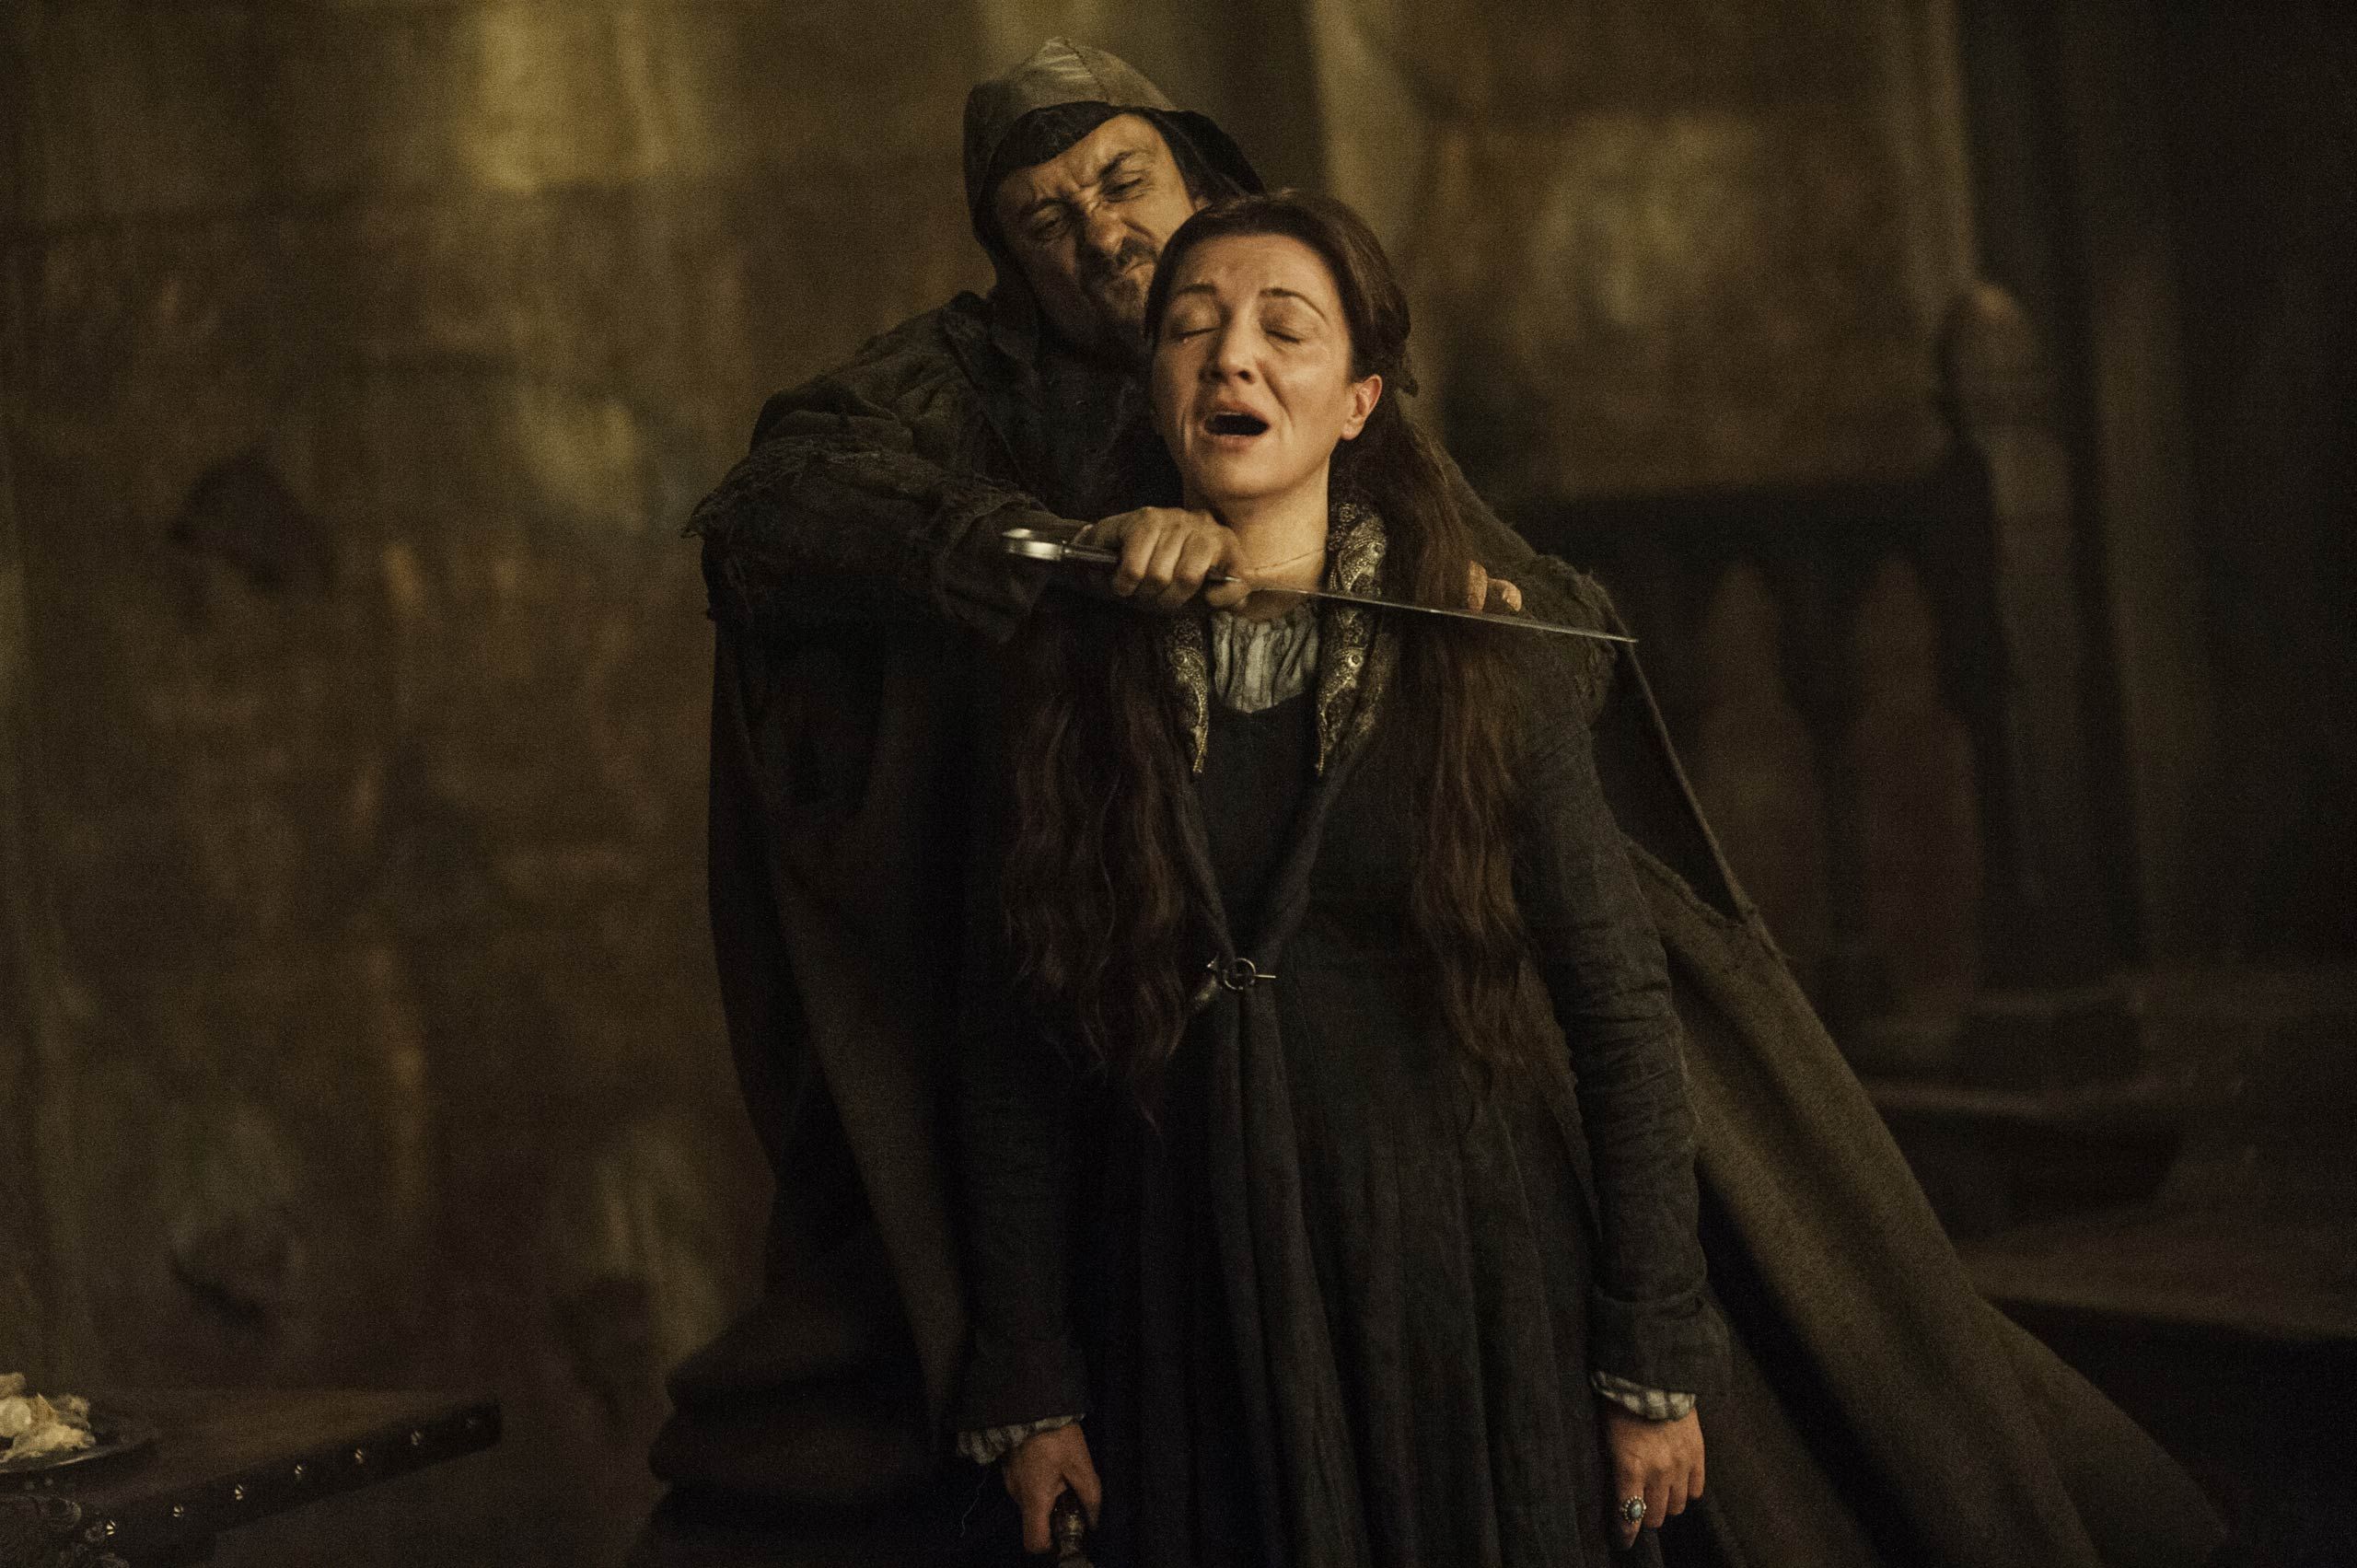 Game of Thrones Season 8 deaths: List of all the characters who died in episode 3